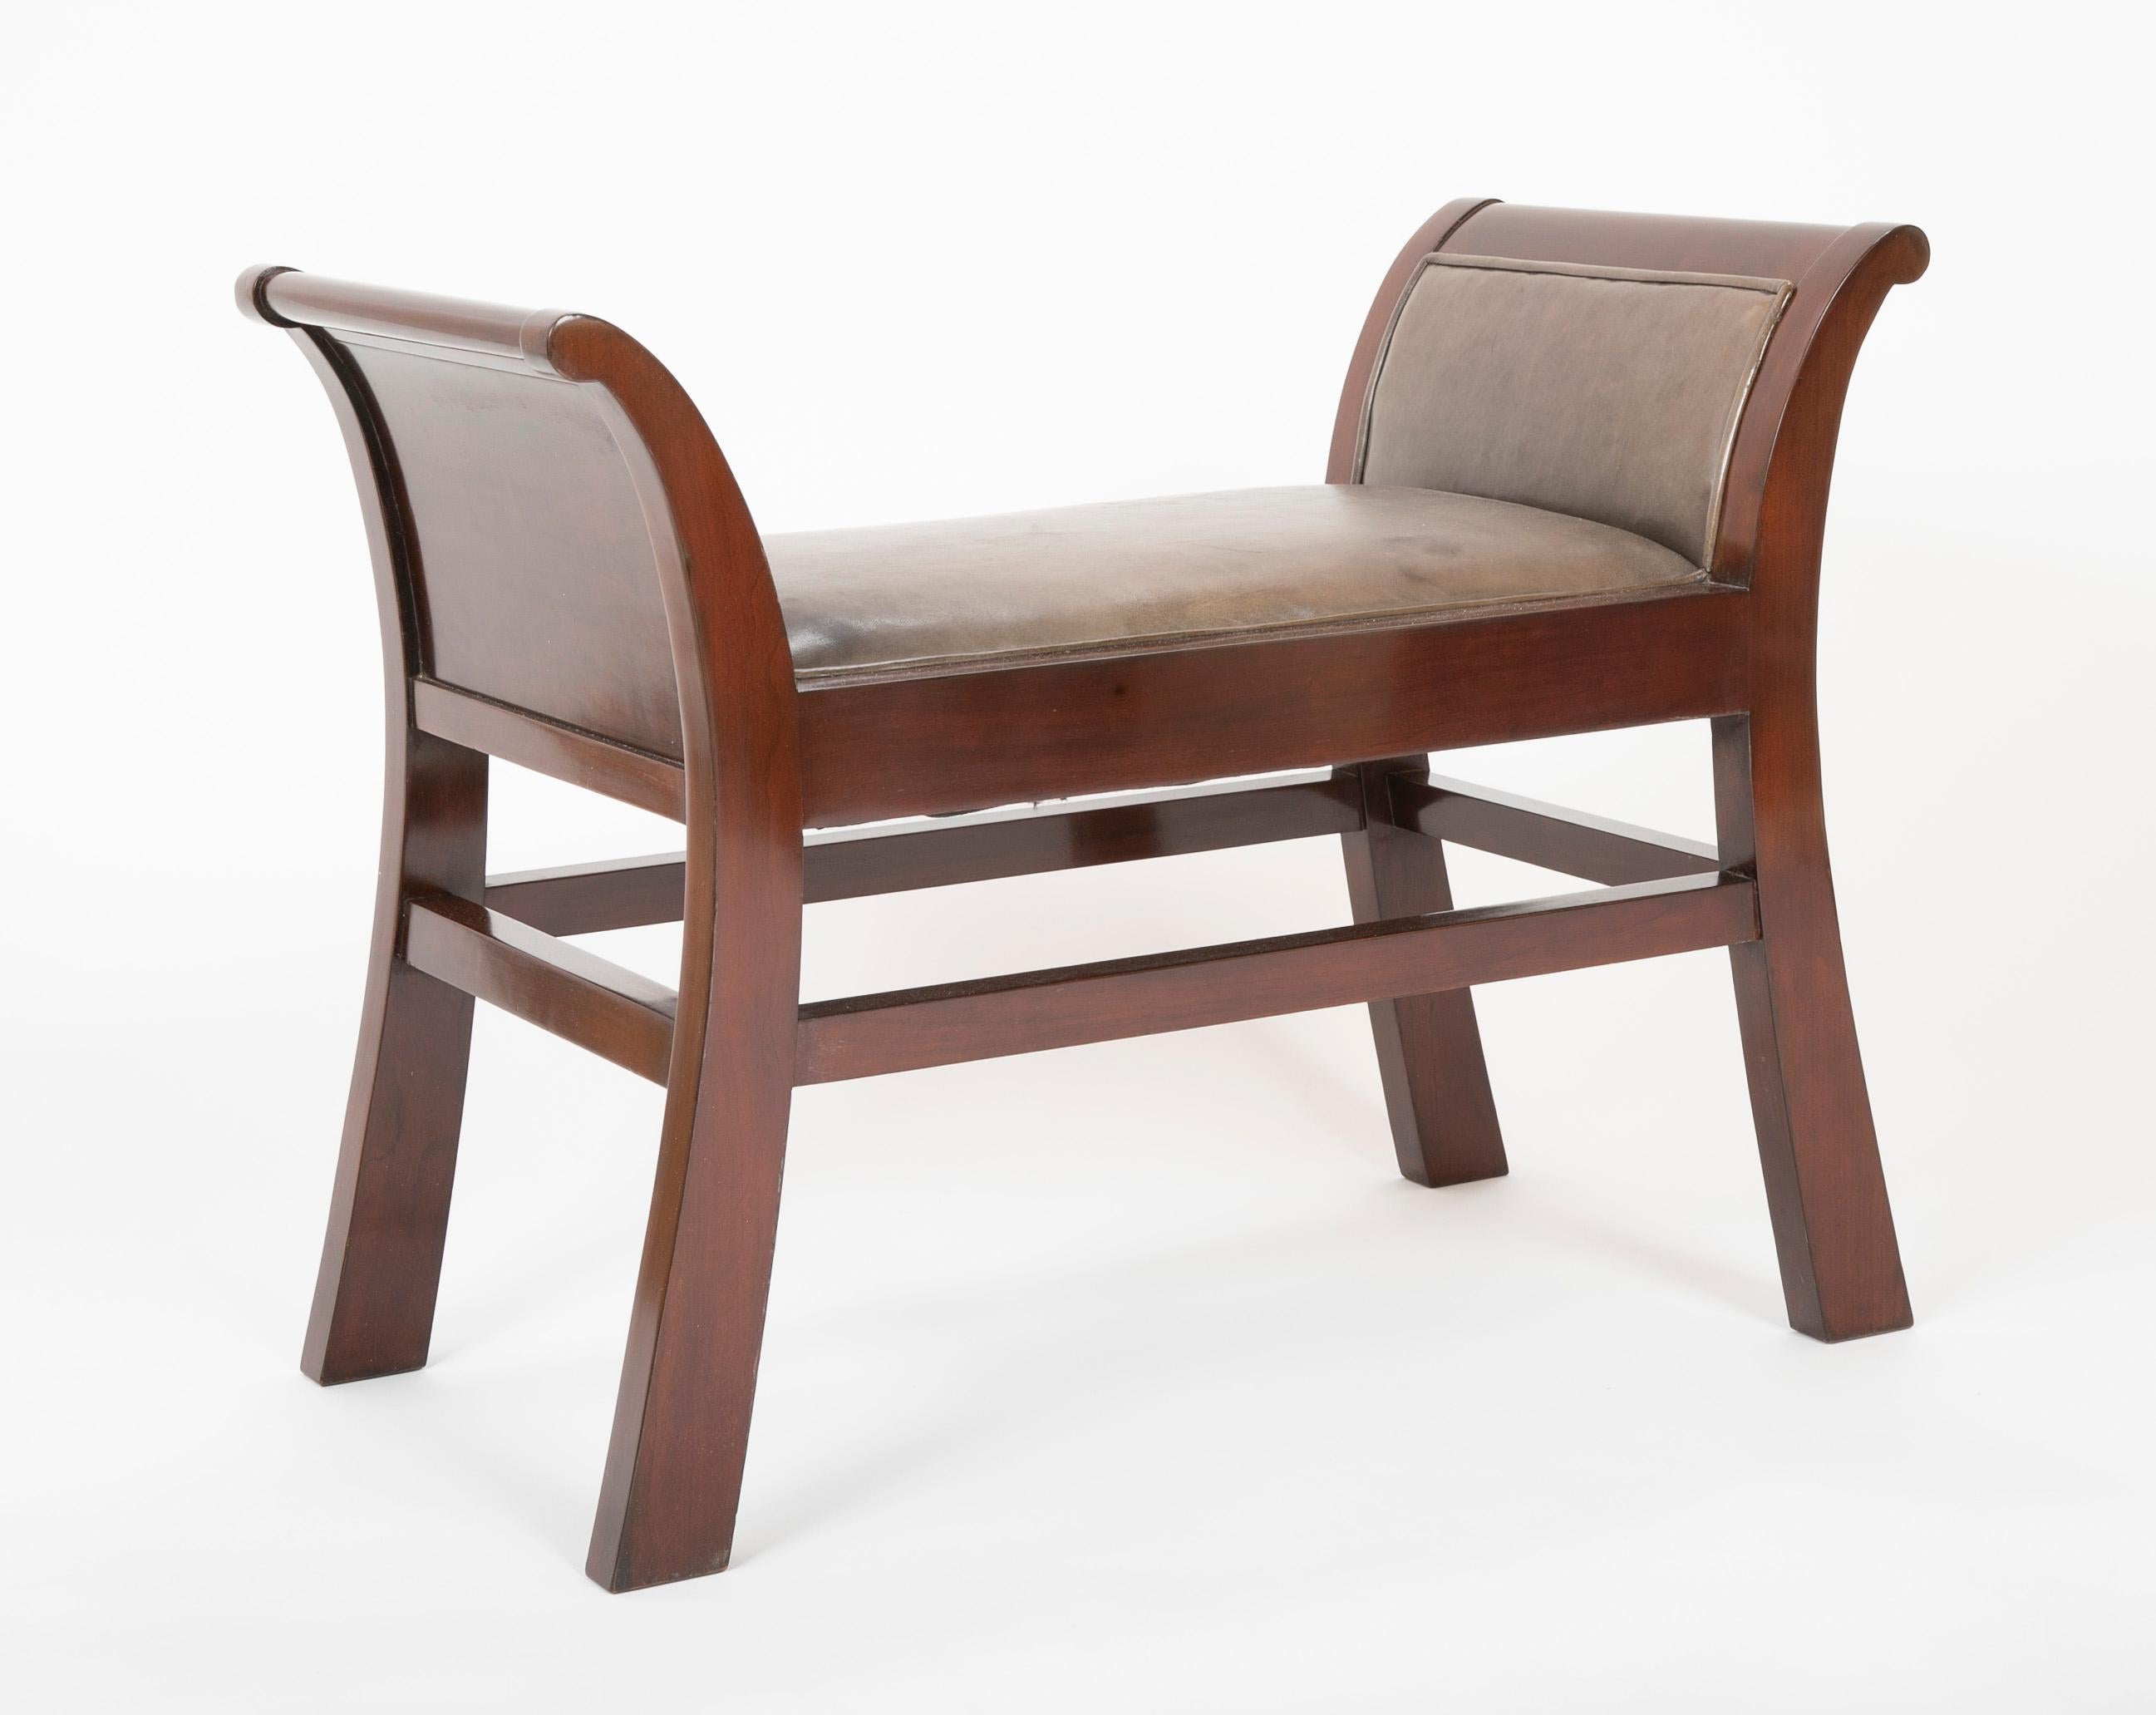 Mahogany Pair of Leather Benches Designed by Jacques Grange for John Widdicomb